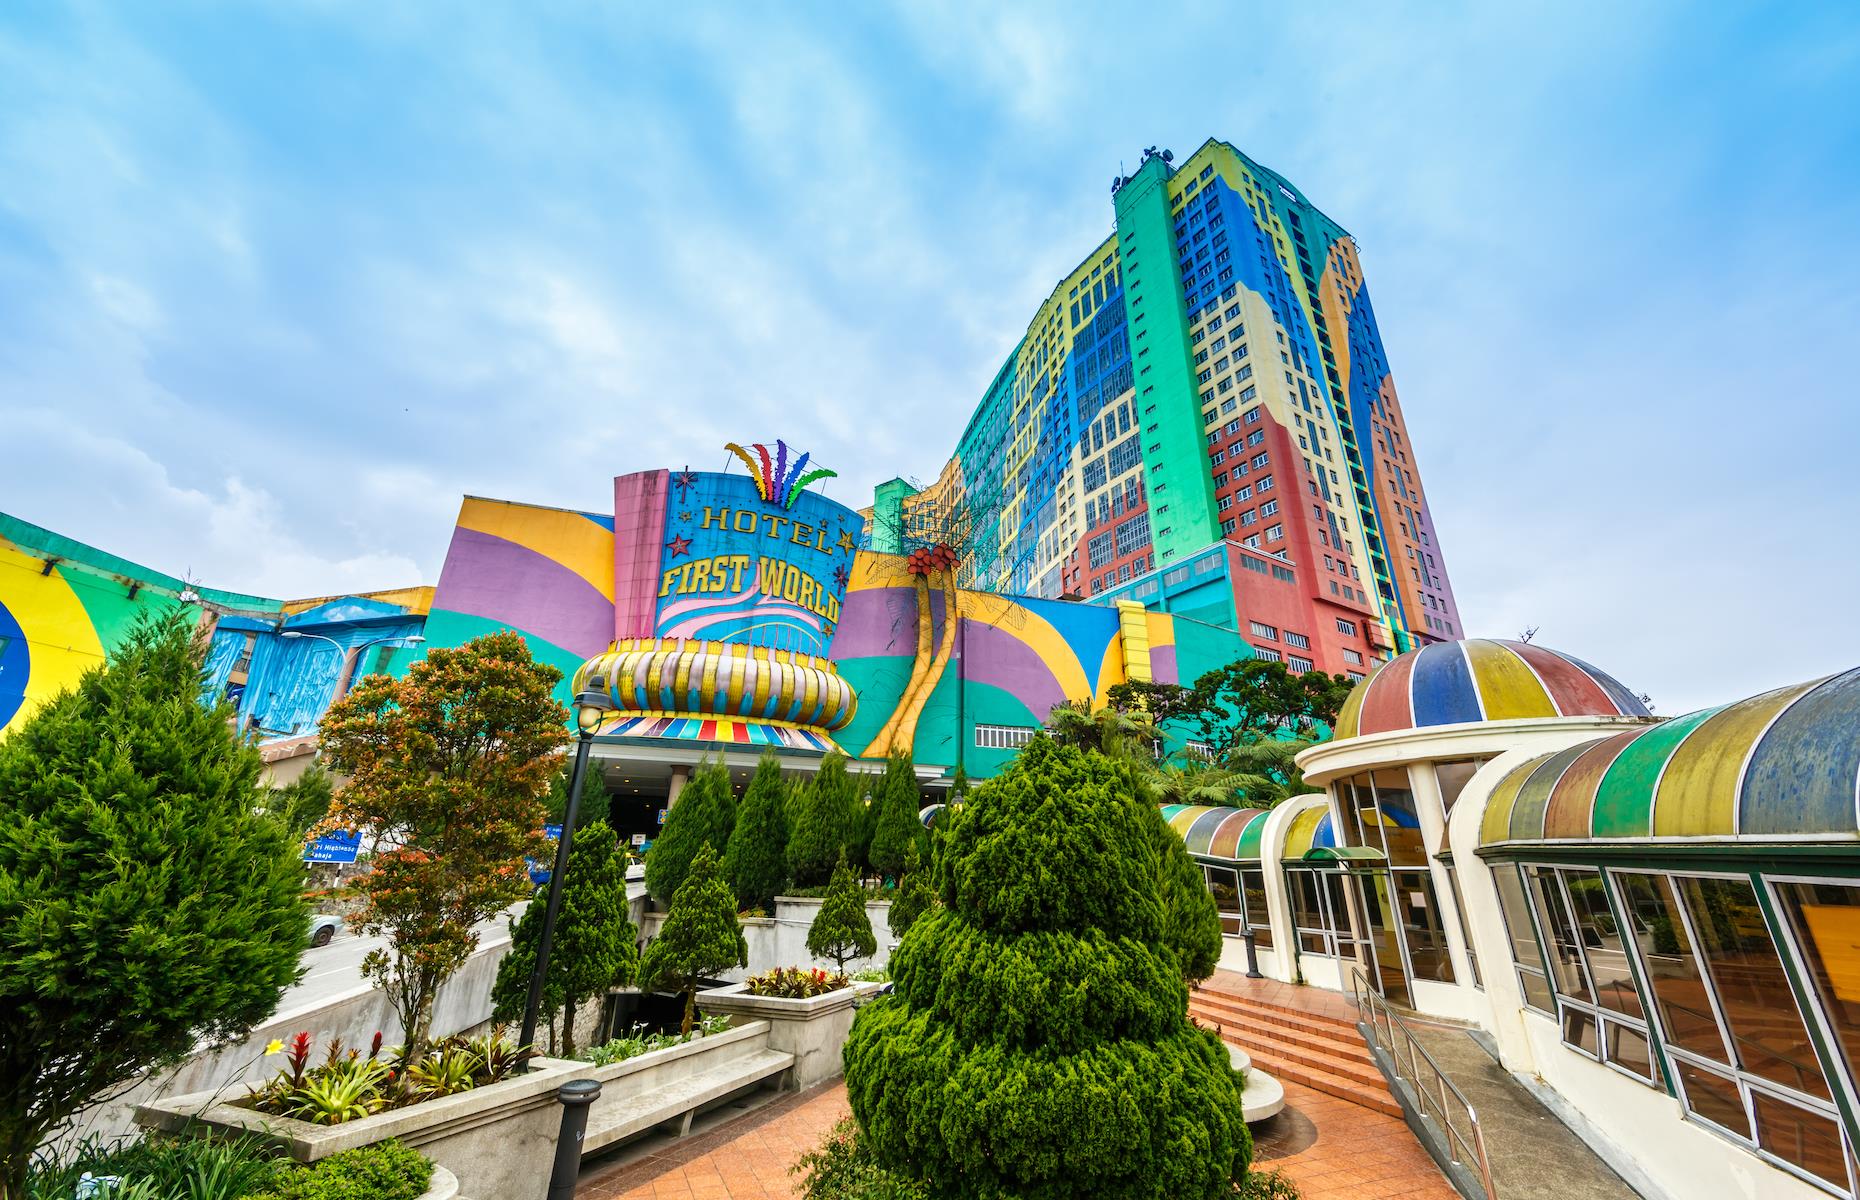 <p>Bright and brash, this behemoth in the Genting Highlands, just north of Kuala Lumpur, is the largest hotel in the world and proud of it. The First World Hotel is part of Resorts World Genting and has 7,351 guest rooms set across its two main rainbow-colored towers. As you’d expect, there’s a wide choice of rooms, from the bijou standard room to the world club rooms featuring 420 square feet (39sqm) of living space. The three-star hotel leads into the wider resort which has a shopping mall, casino, indoor theme park and golf course.</p>  <p><strong><a href="https://www.loveexploring.com/galleries/72892/the-worlds-tallest-hotels-with-breathtaking-views?page=1">These are the highest hotel rooms in the world</a></strong></p>